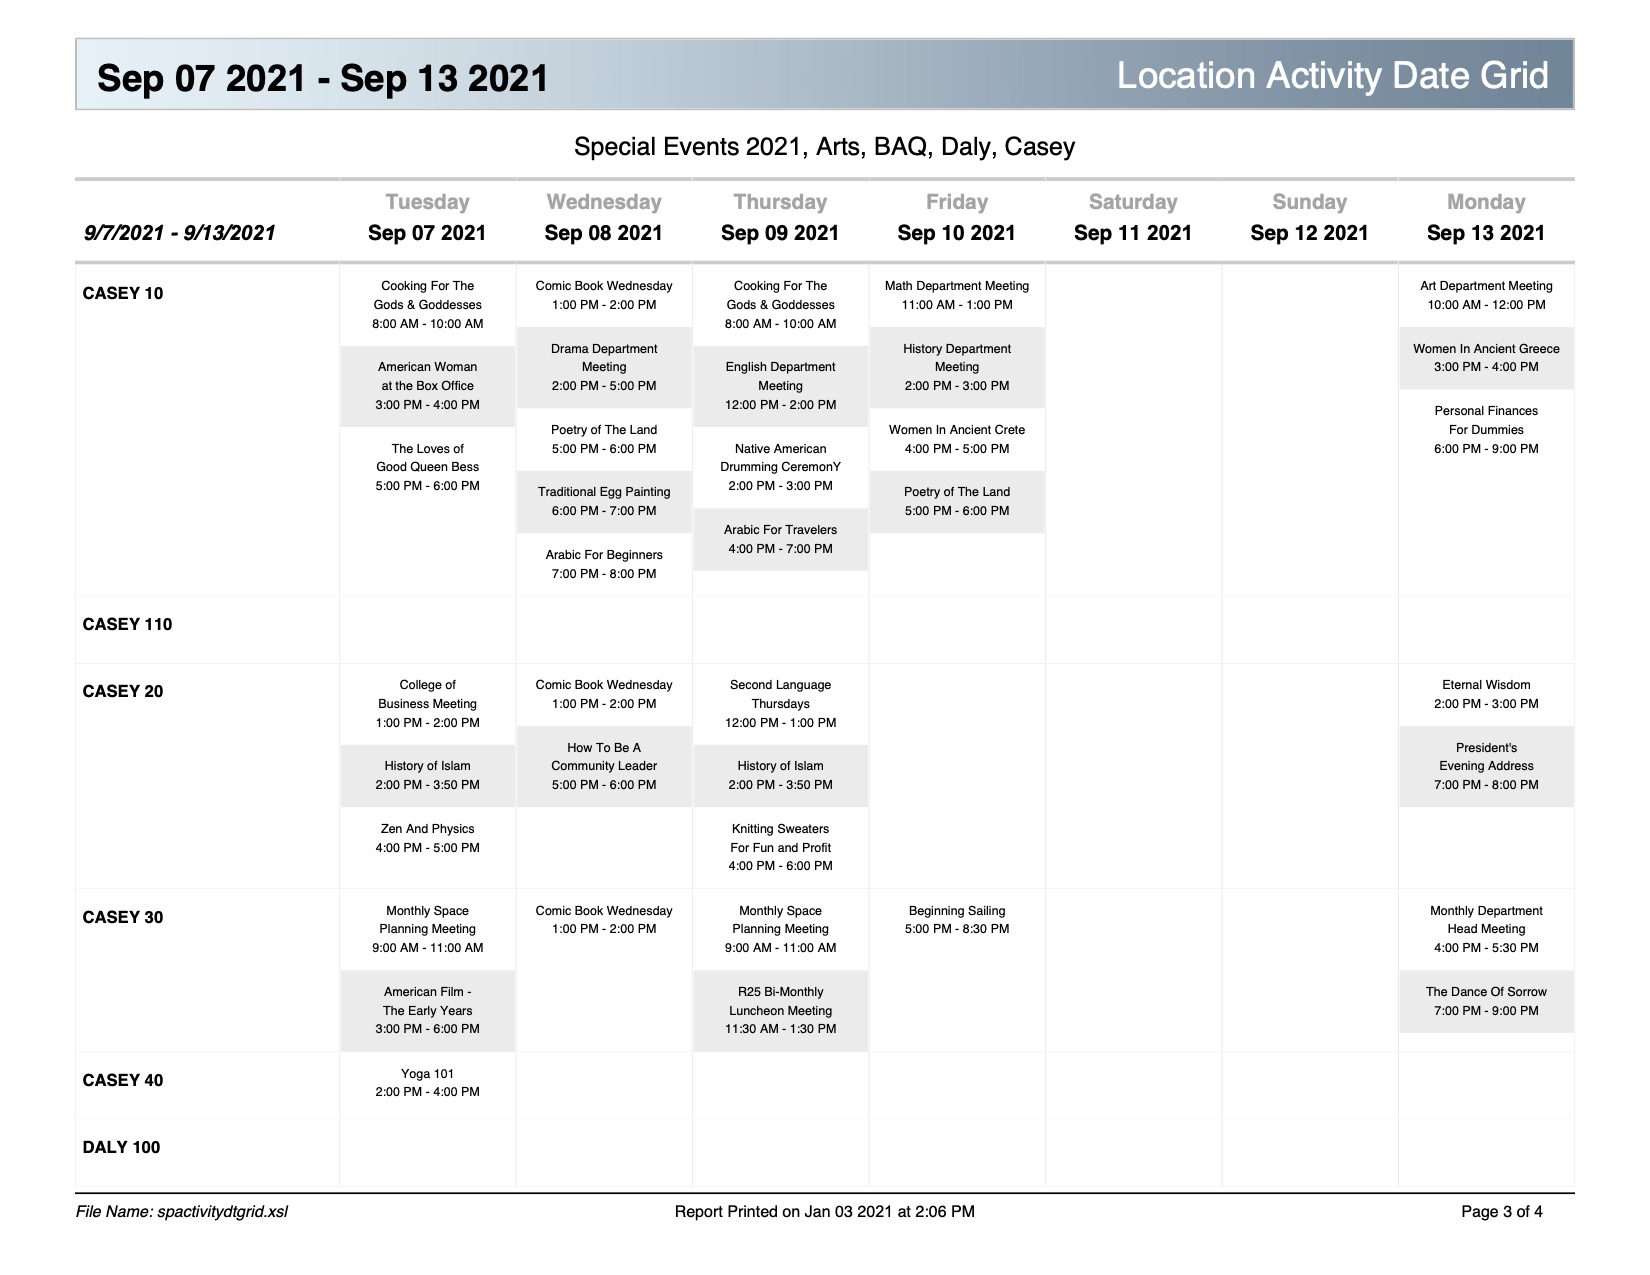 Location activity date grid example